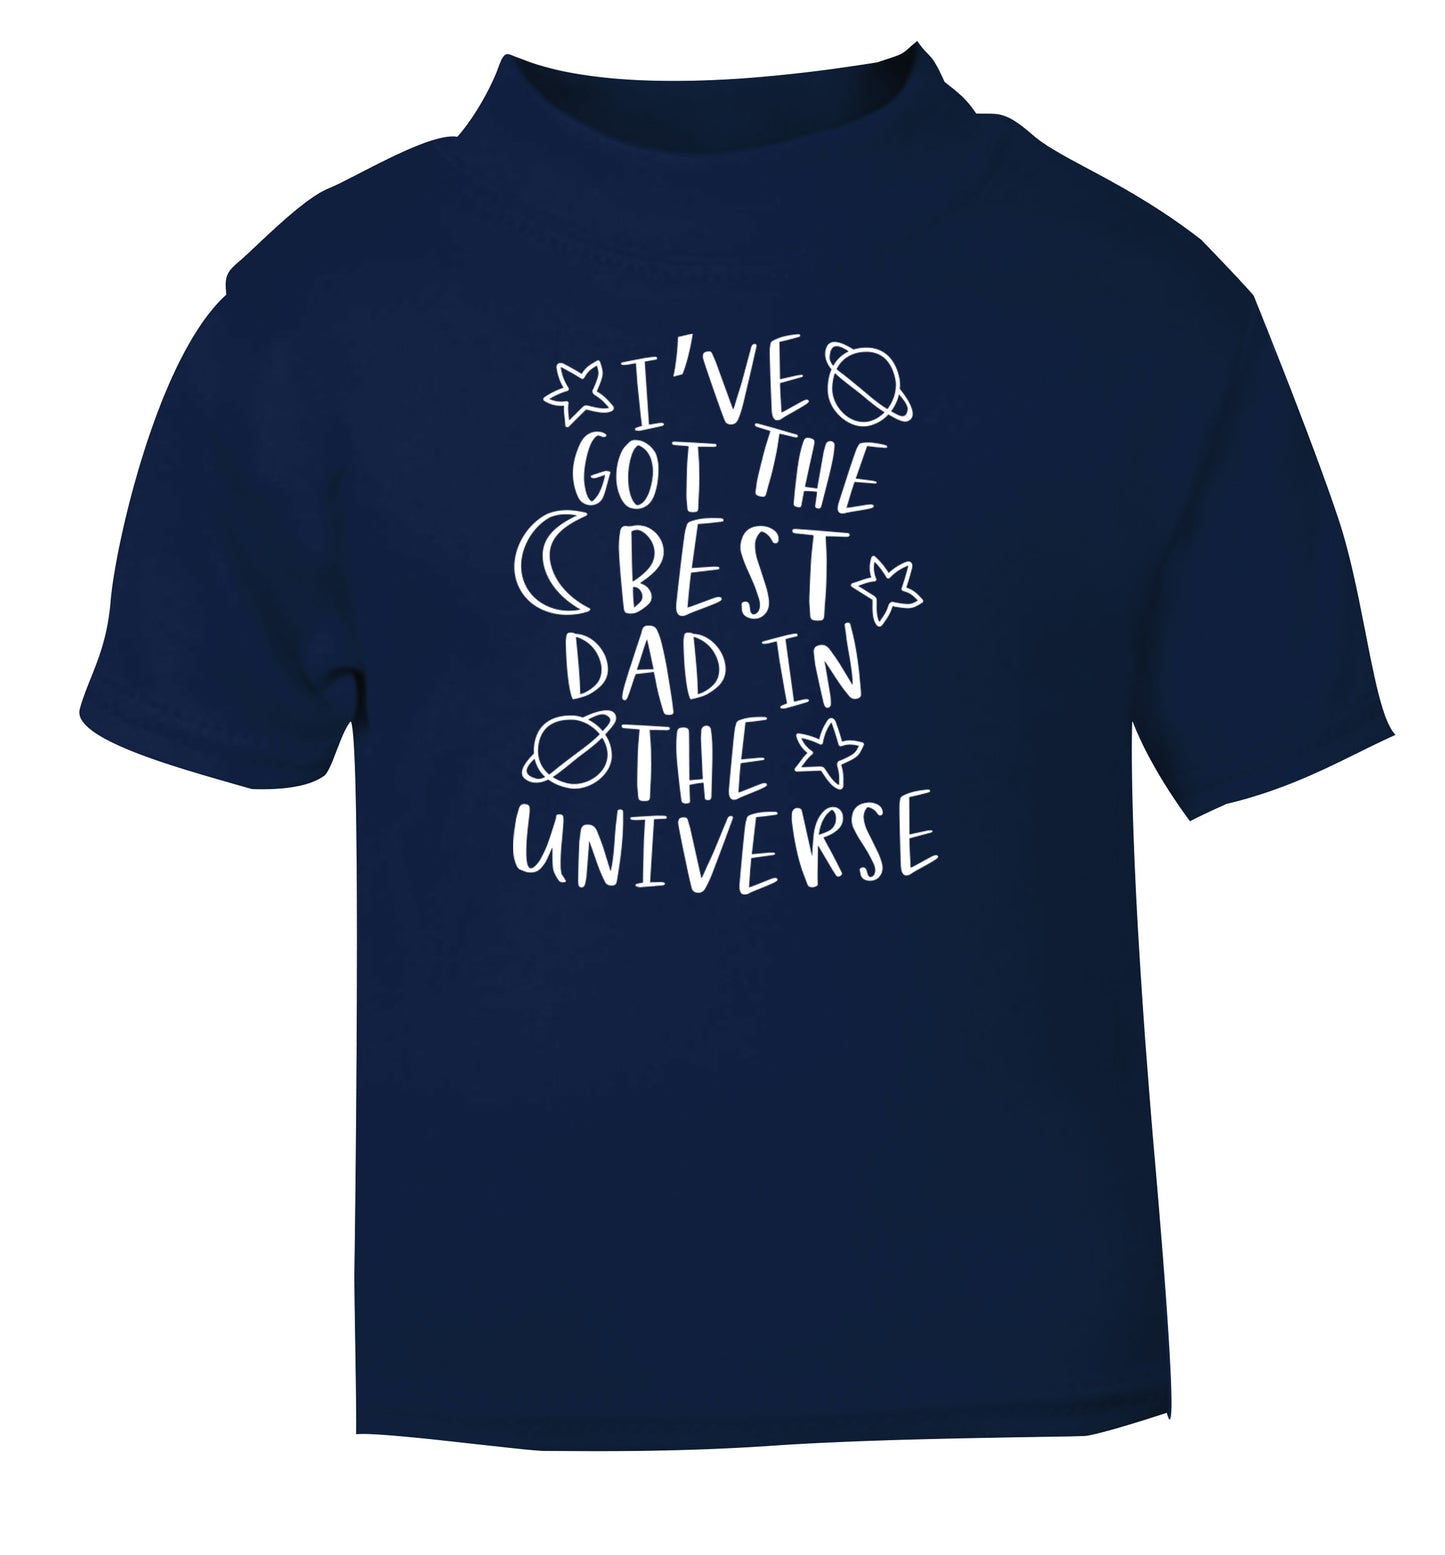 I've got the best dad in the universe navy Baby Toddler Tshirt 2 Years